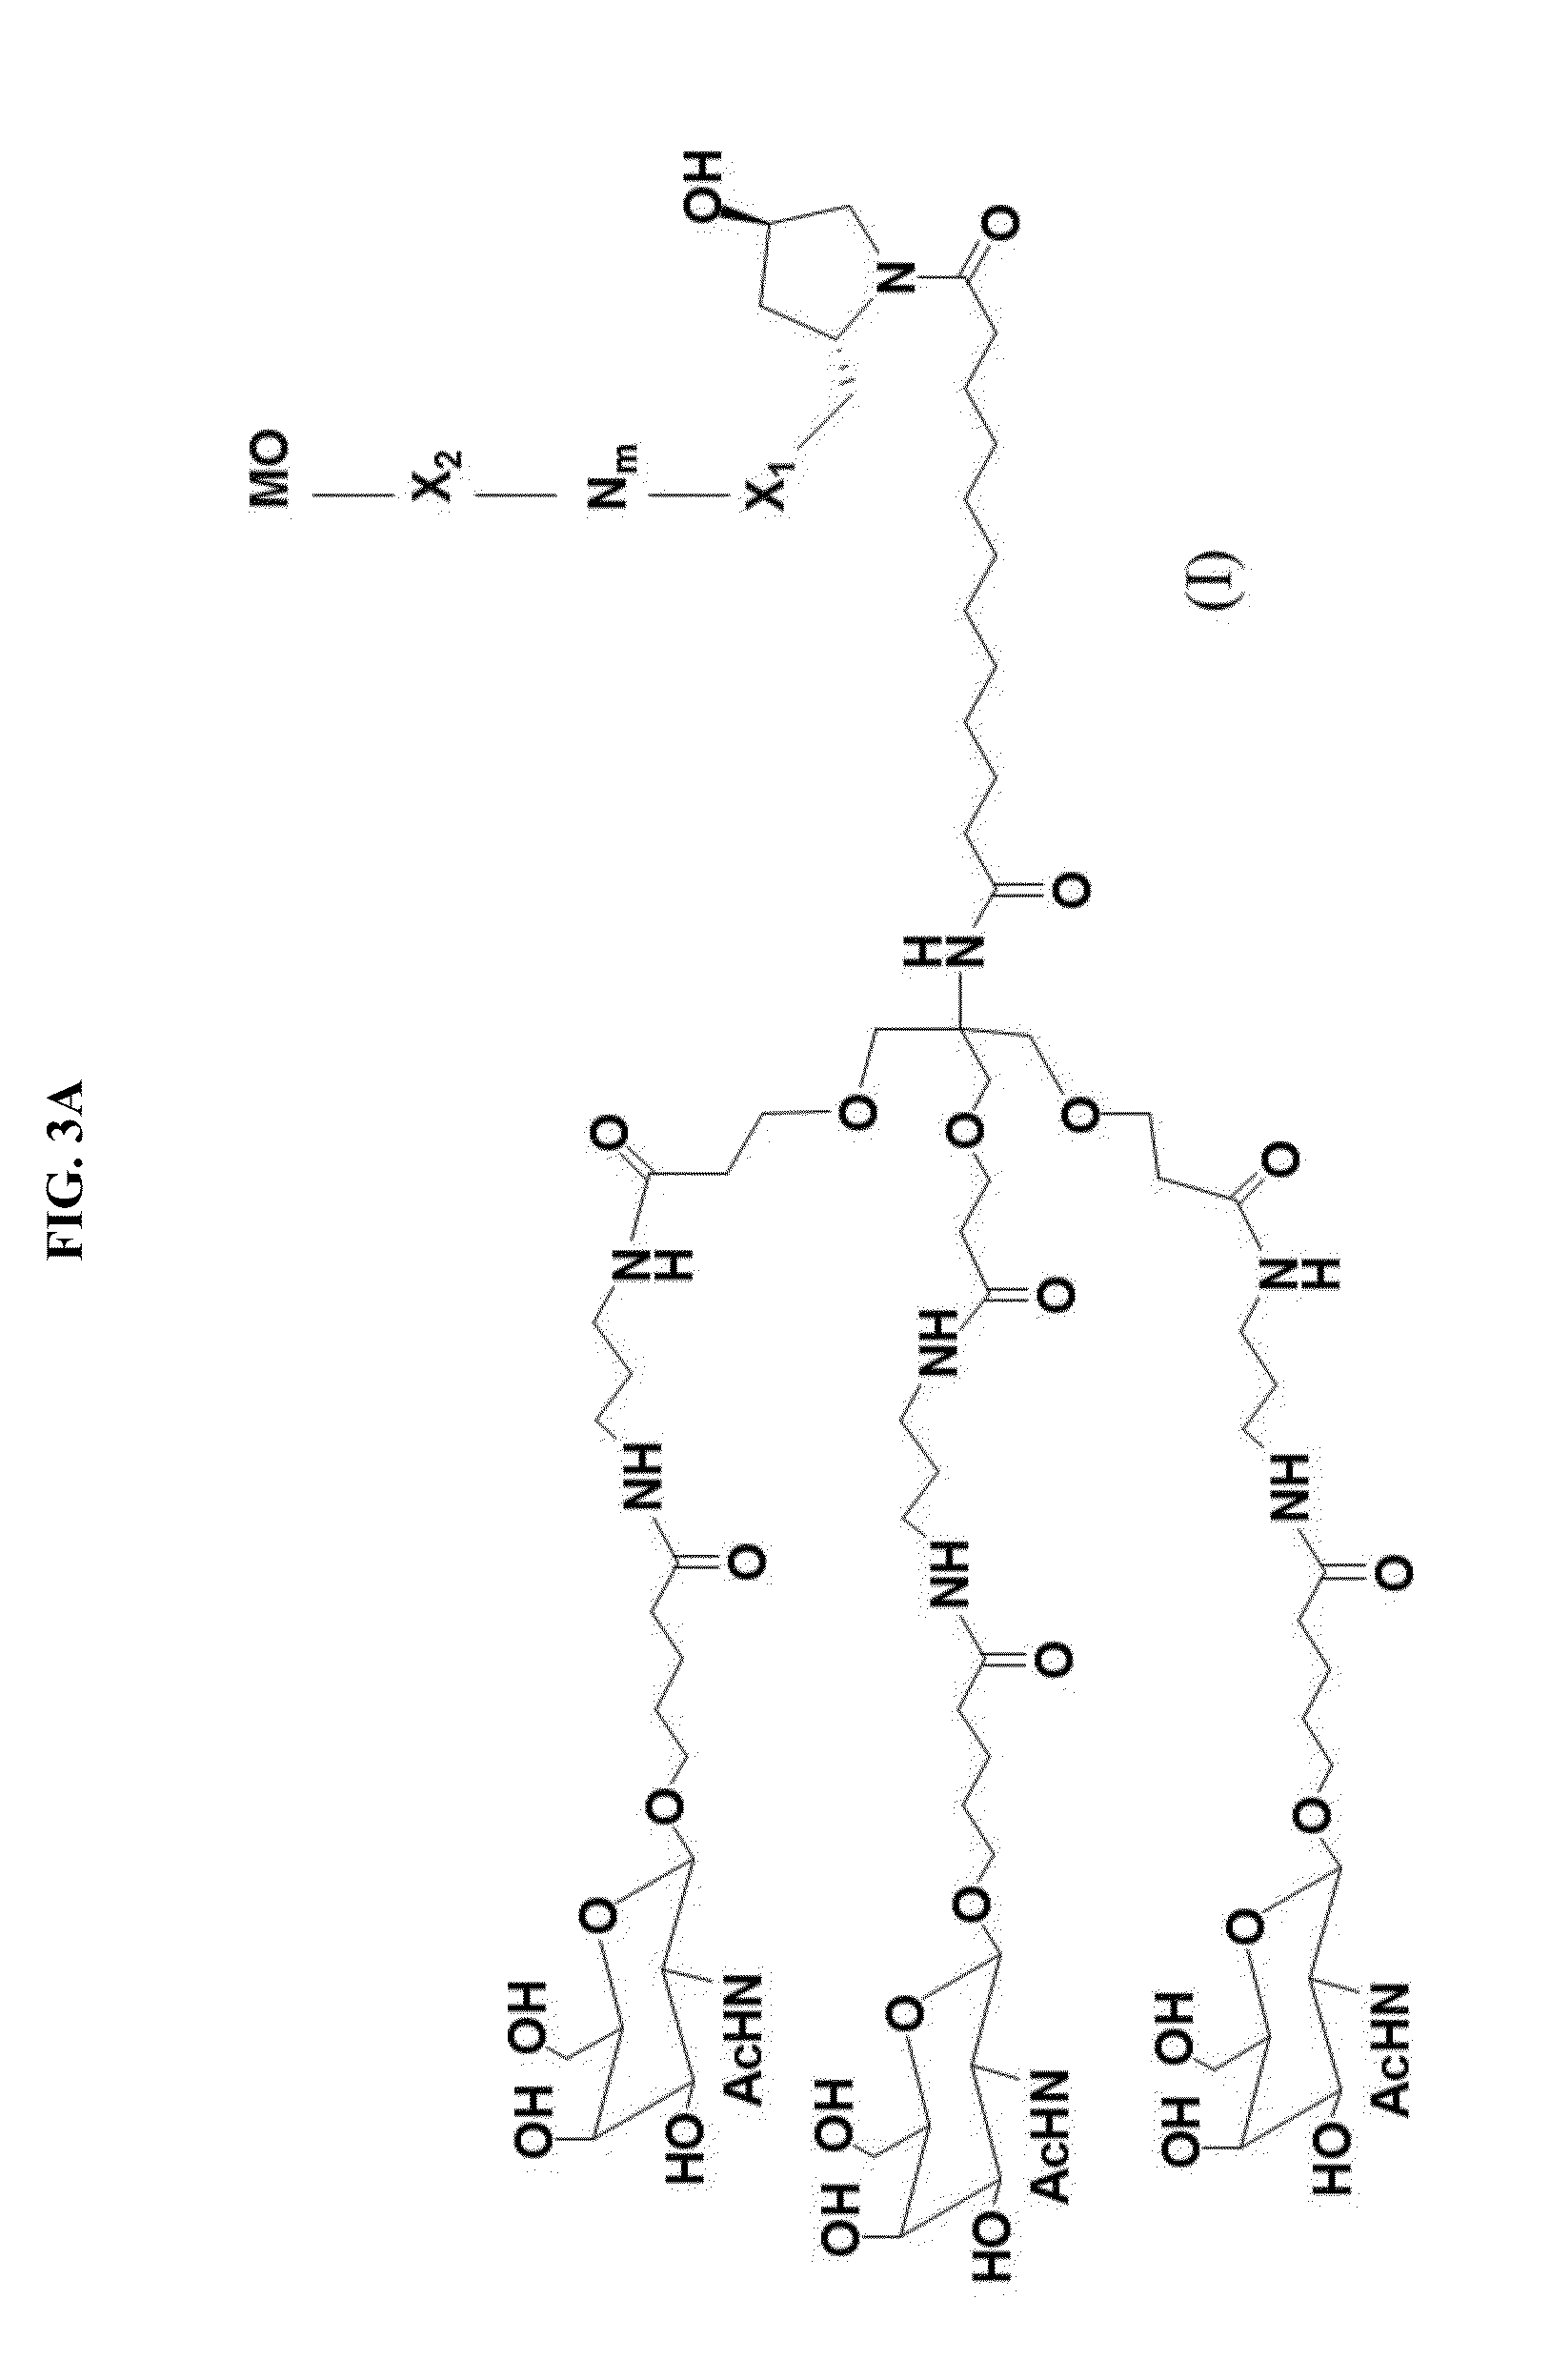 Microrna compounds and methods for modulating mir-122